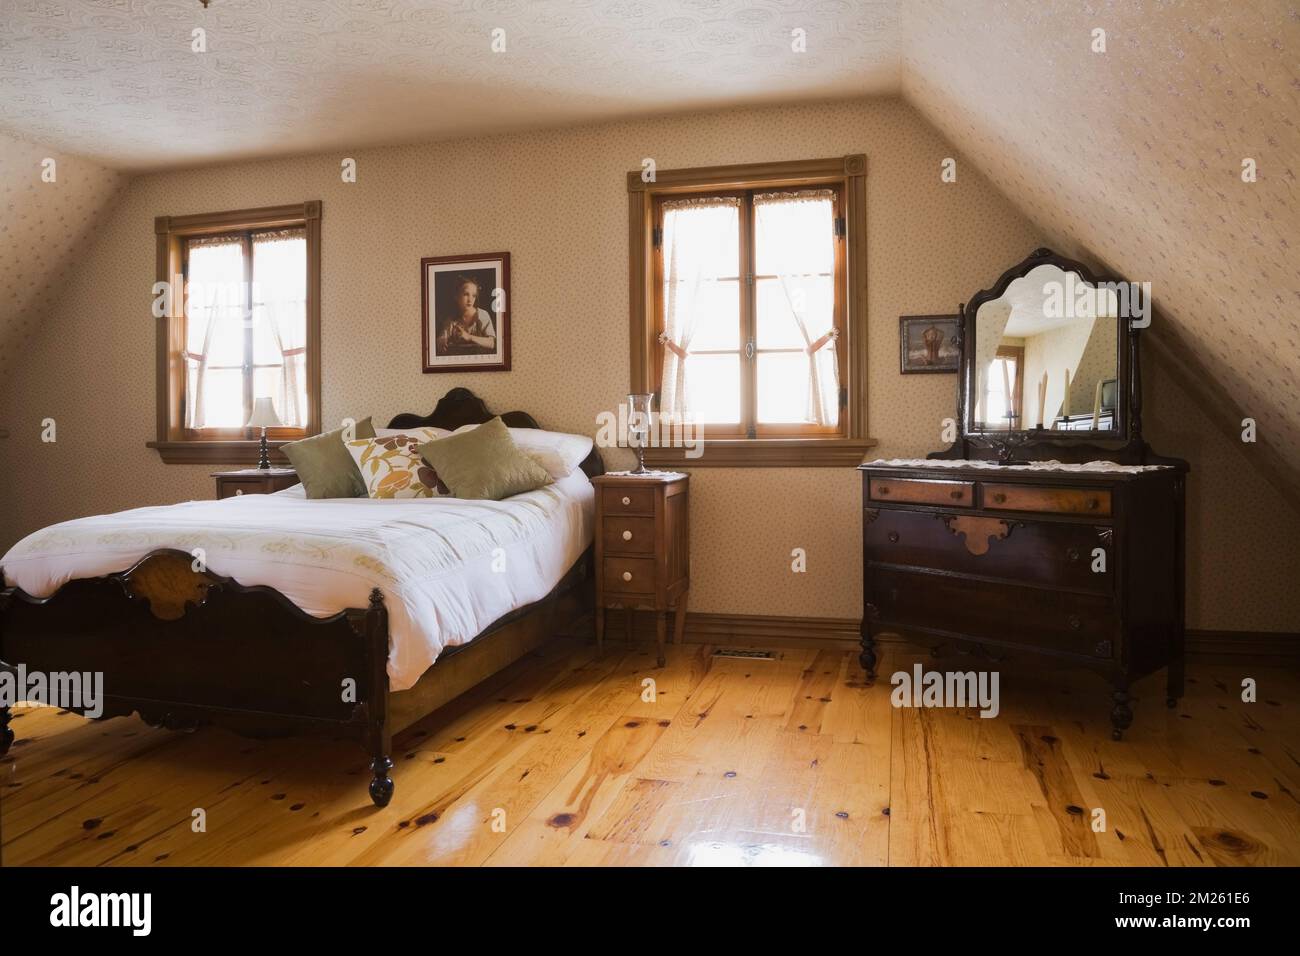 Double wood frame bed in master bedroom on upstairs floor inside old 1800s home. Stock Photo